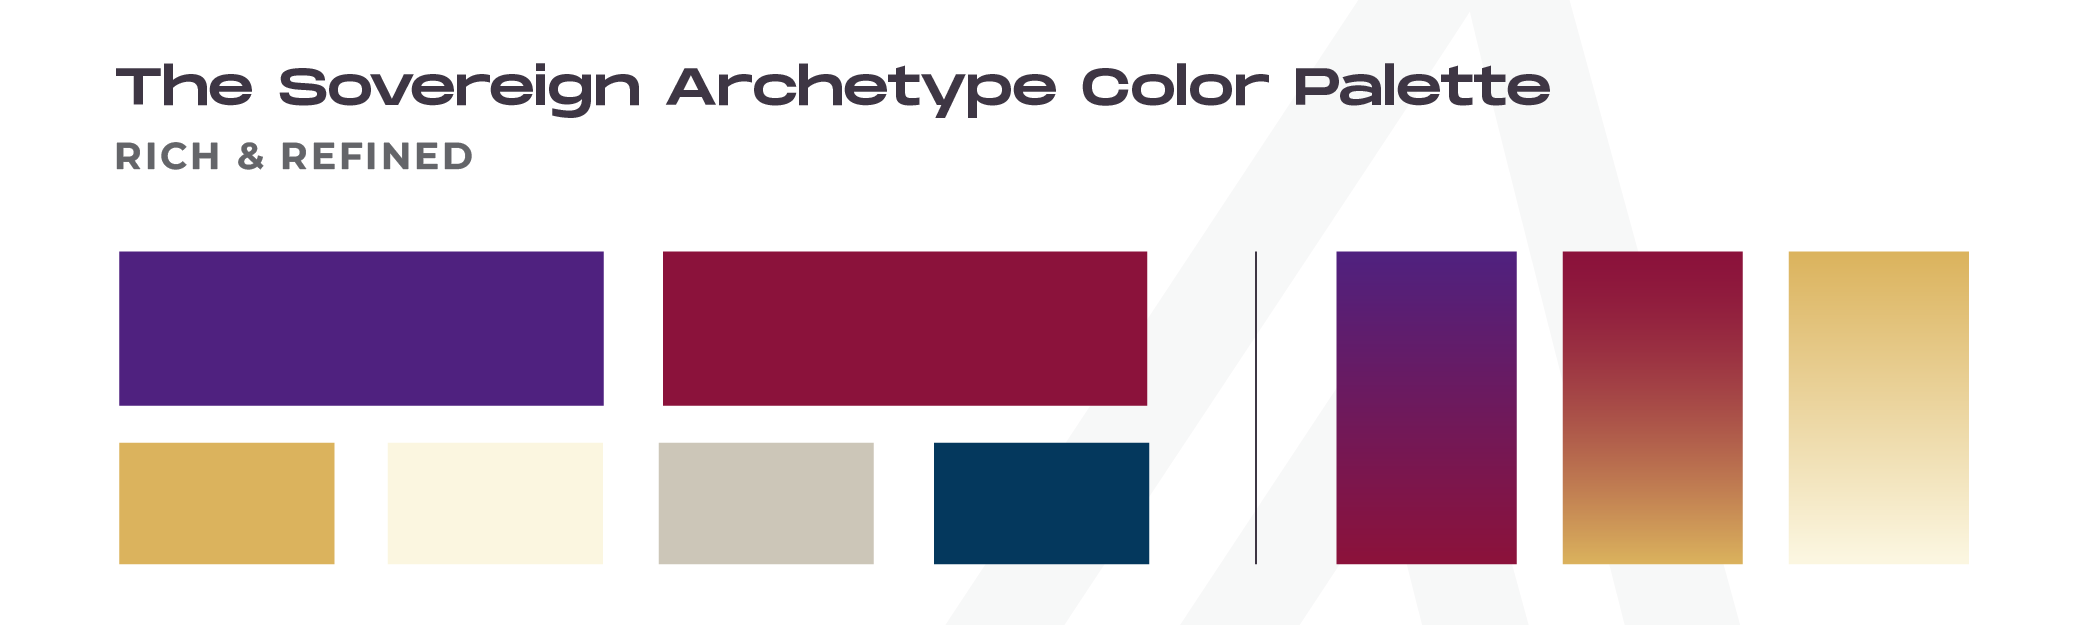 Brand Archetypes Color Palettes_The Sovereign